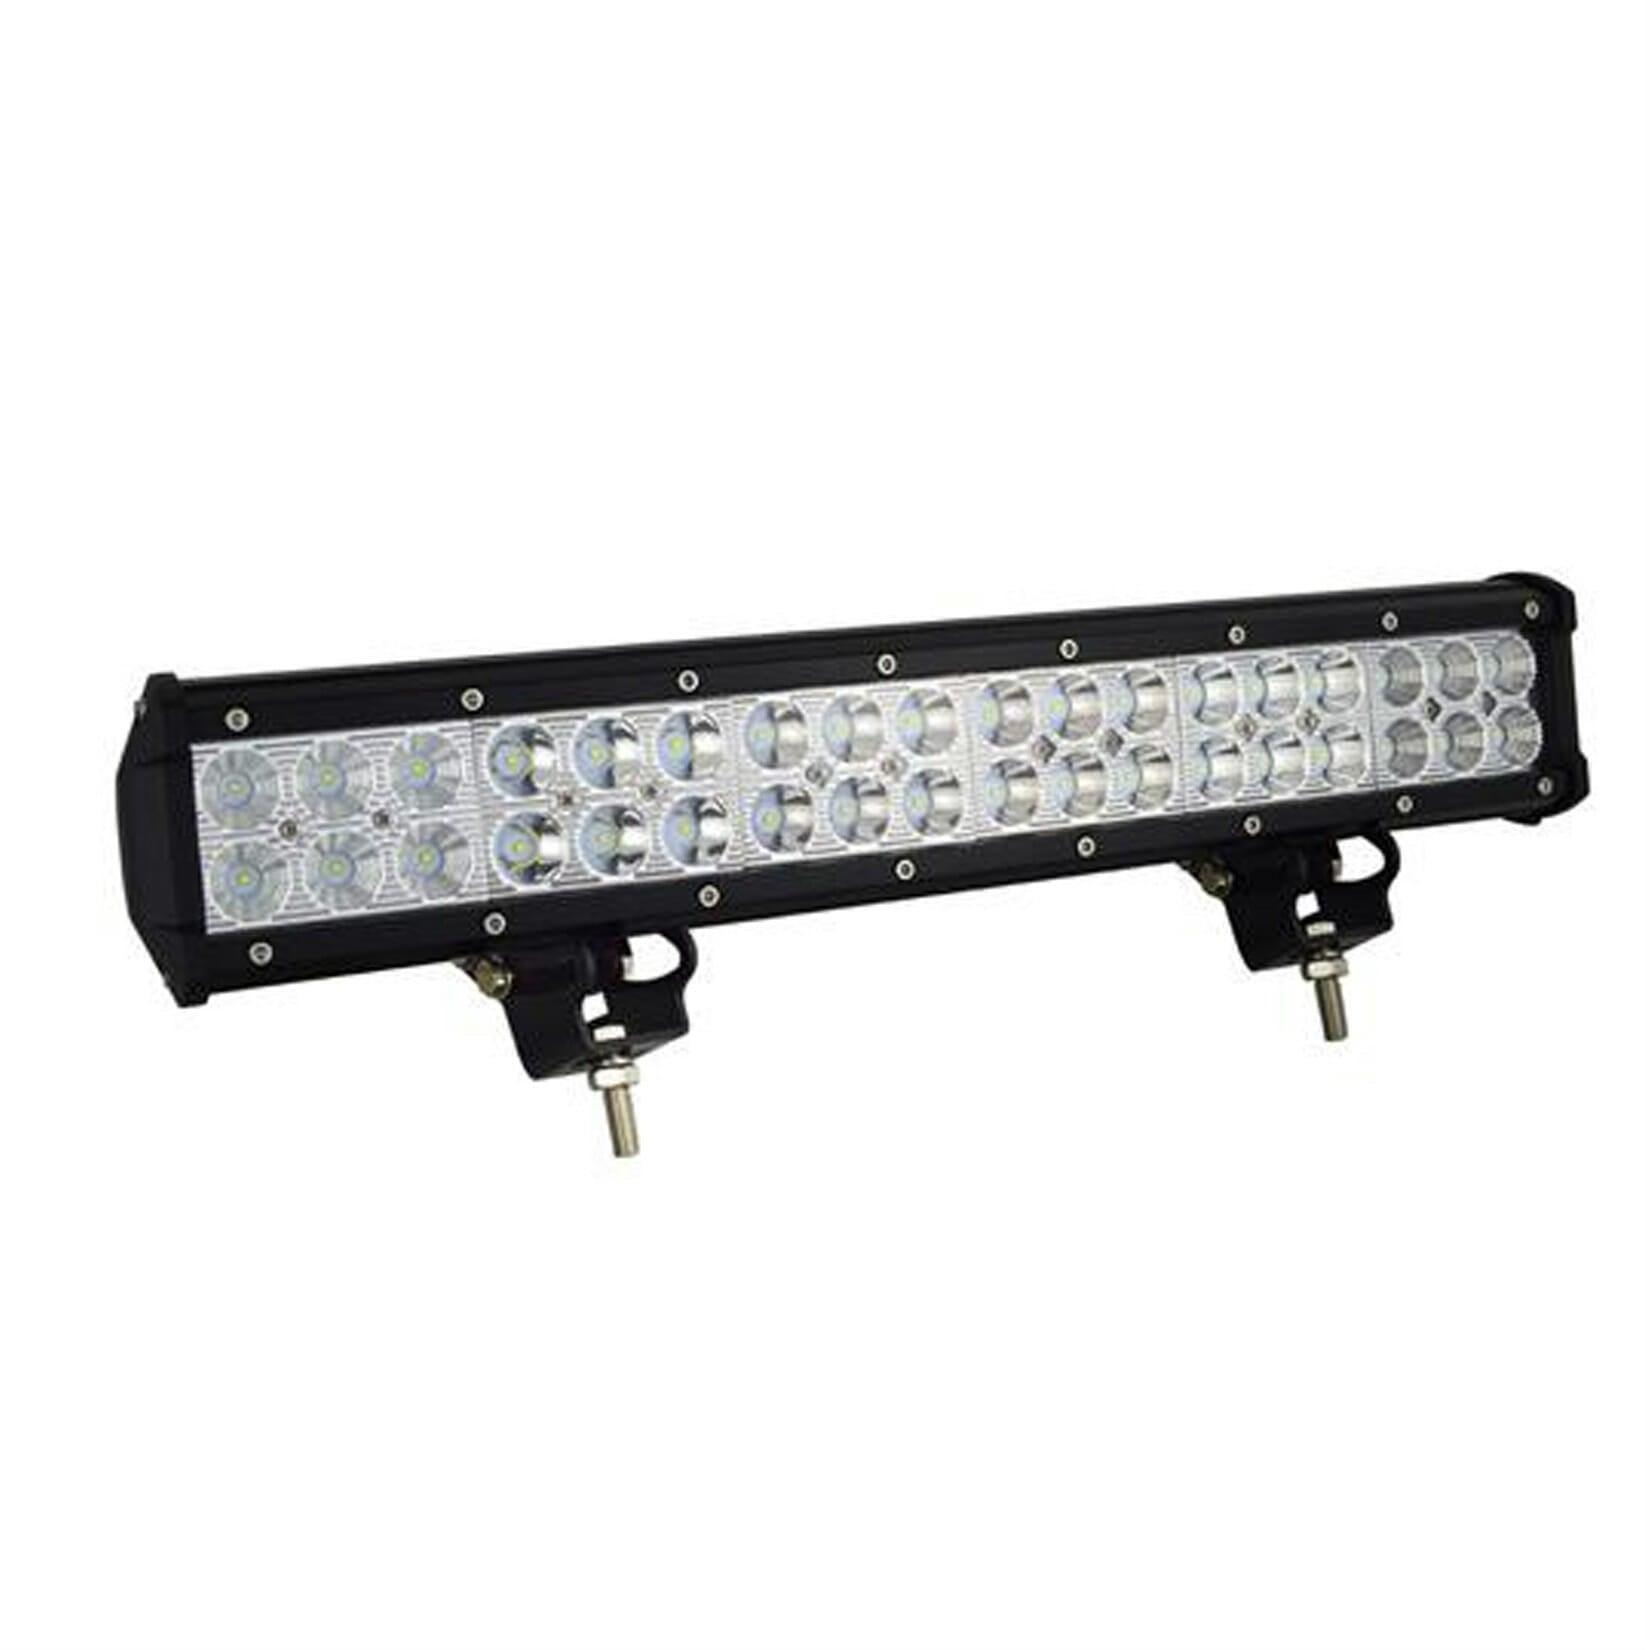 17 INCH STRAIGHT DOUBLE ROW LED LIGHT BAR - LL-SMD108 - PICKUP LIGHTBAR - Storm Xccessories2